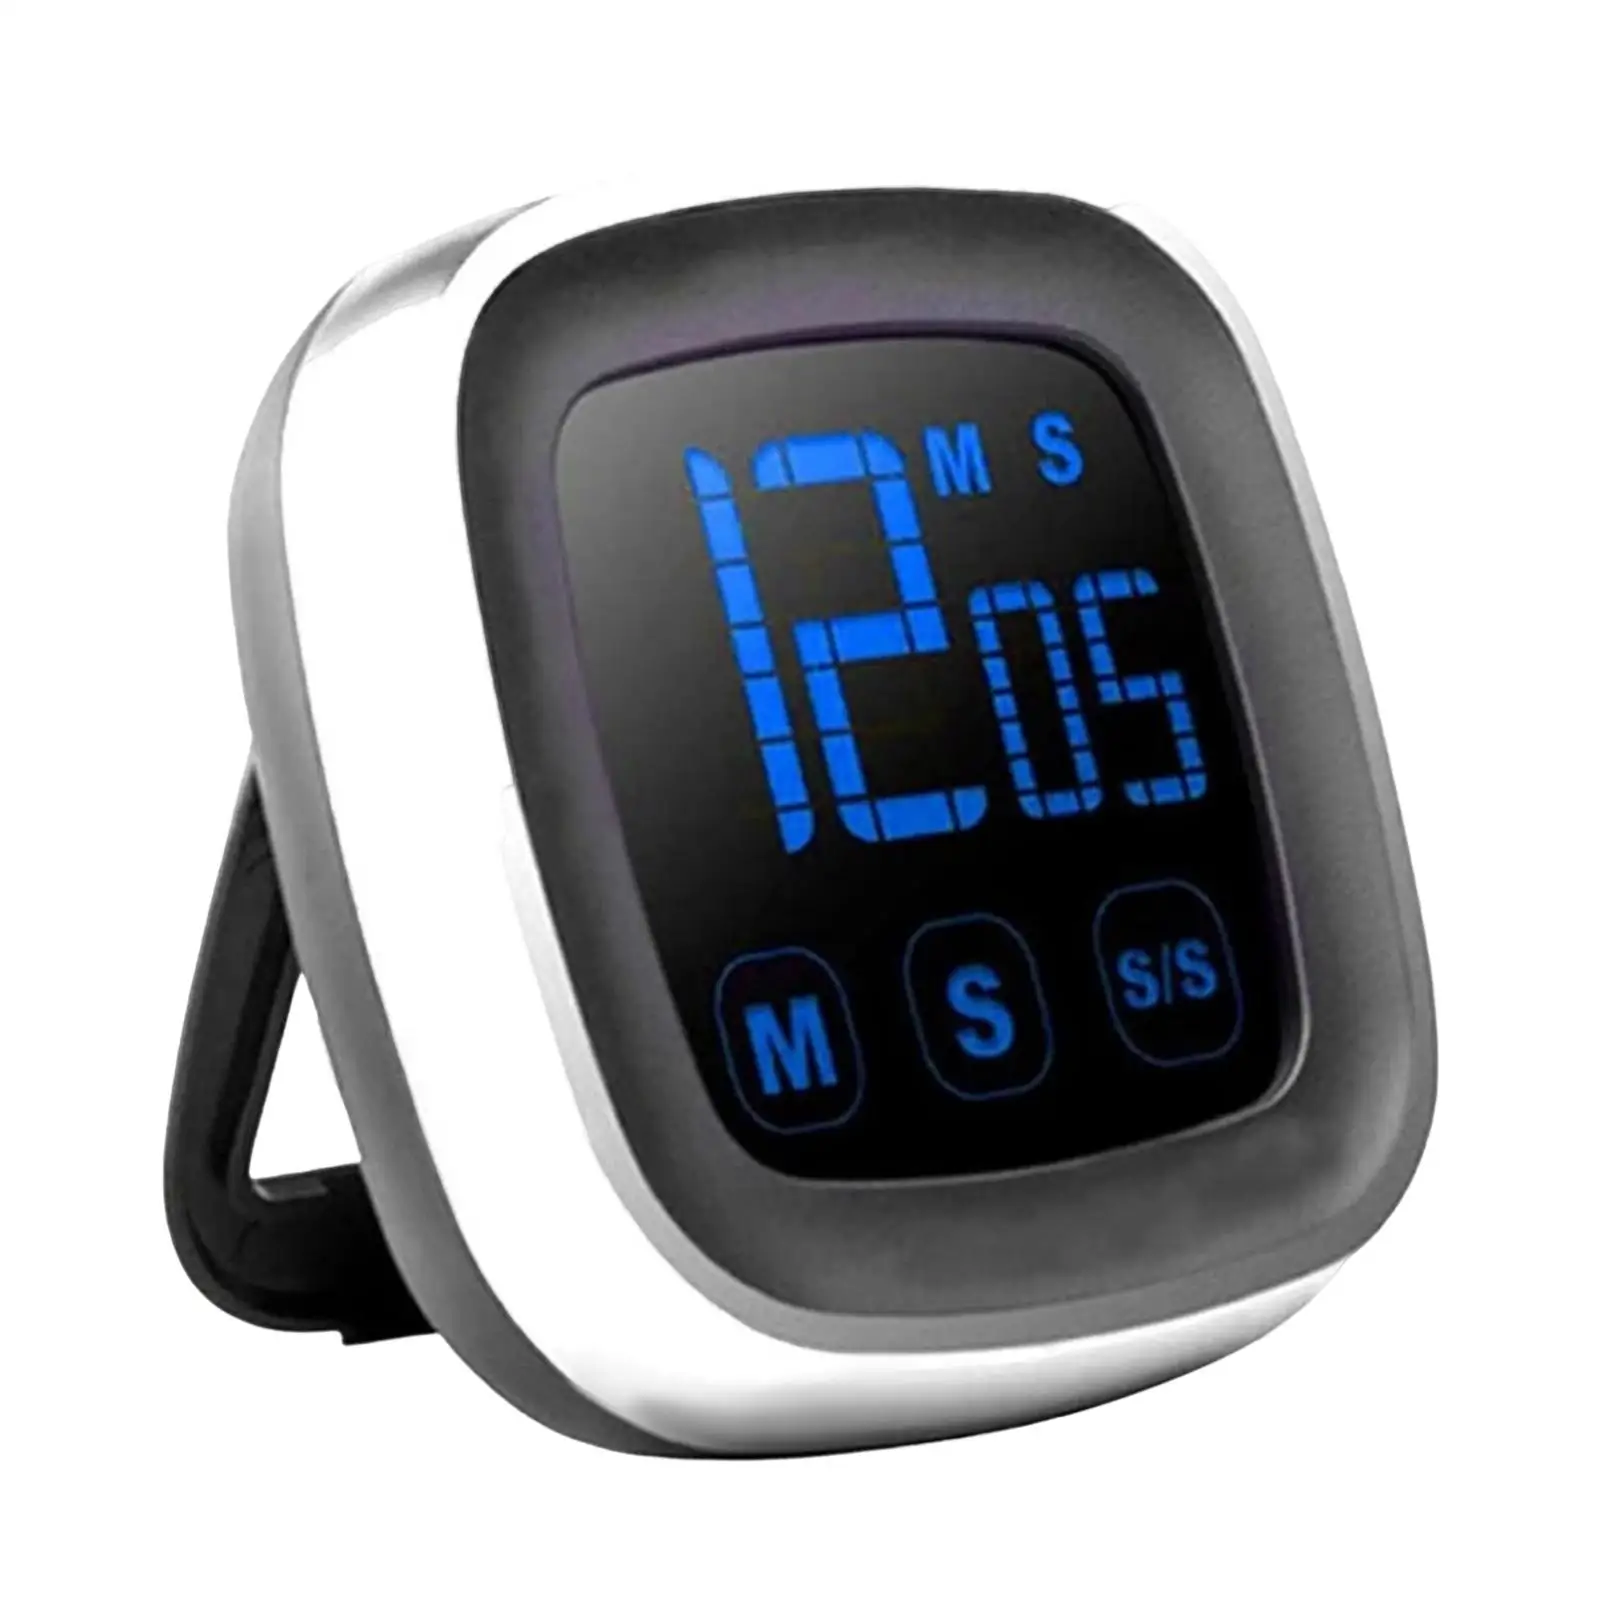 Kitchen Digital Timer with and Count up with Stand Big digits Large LED Display Clock for Sports Fitness Study Shower